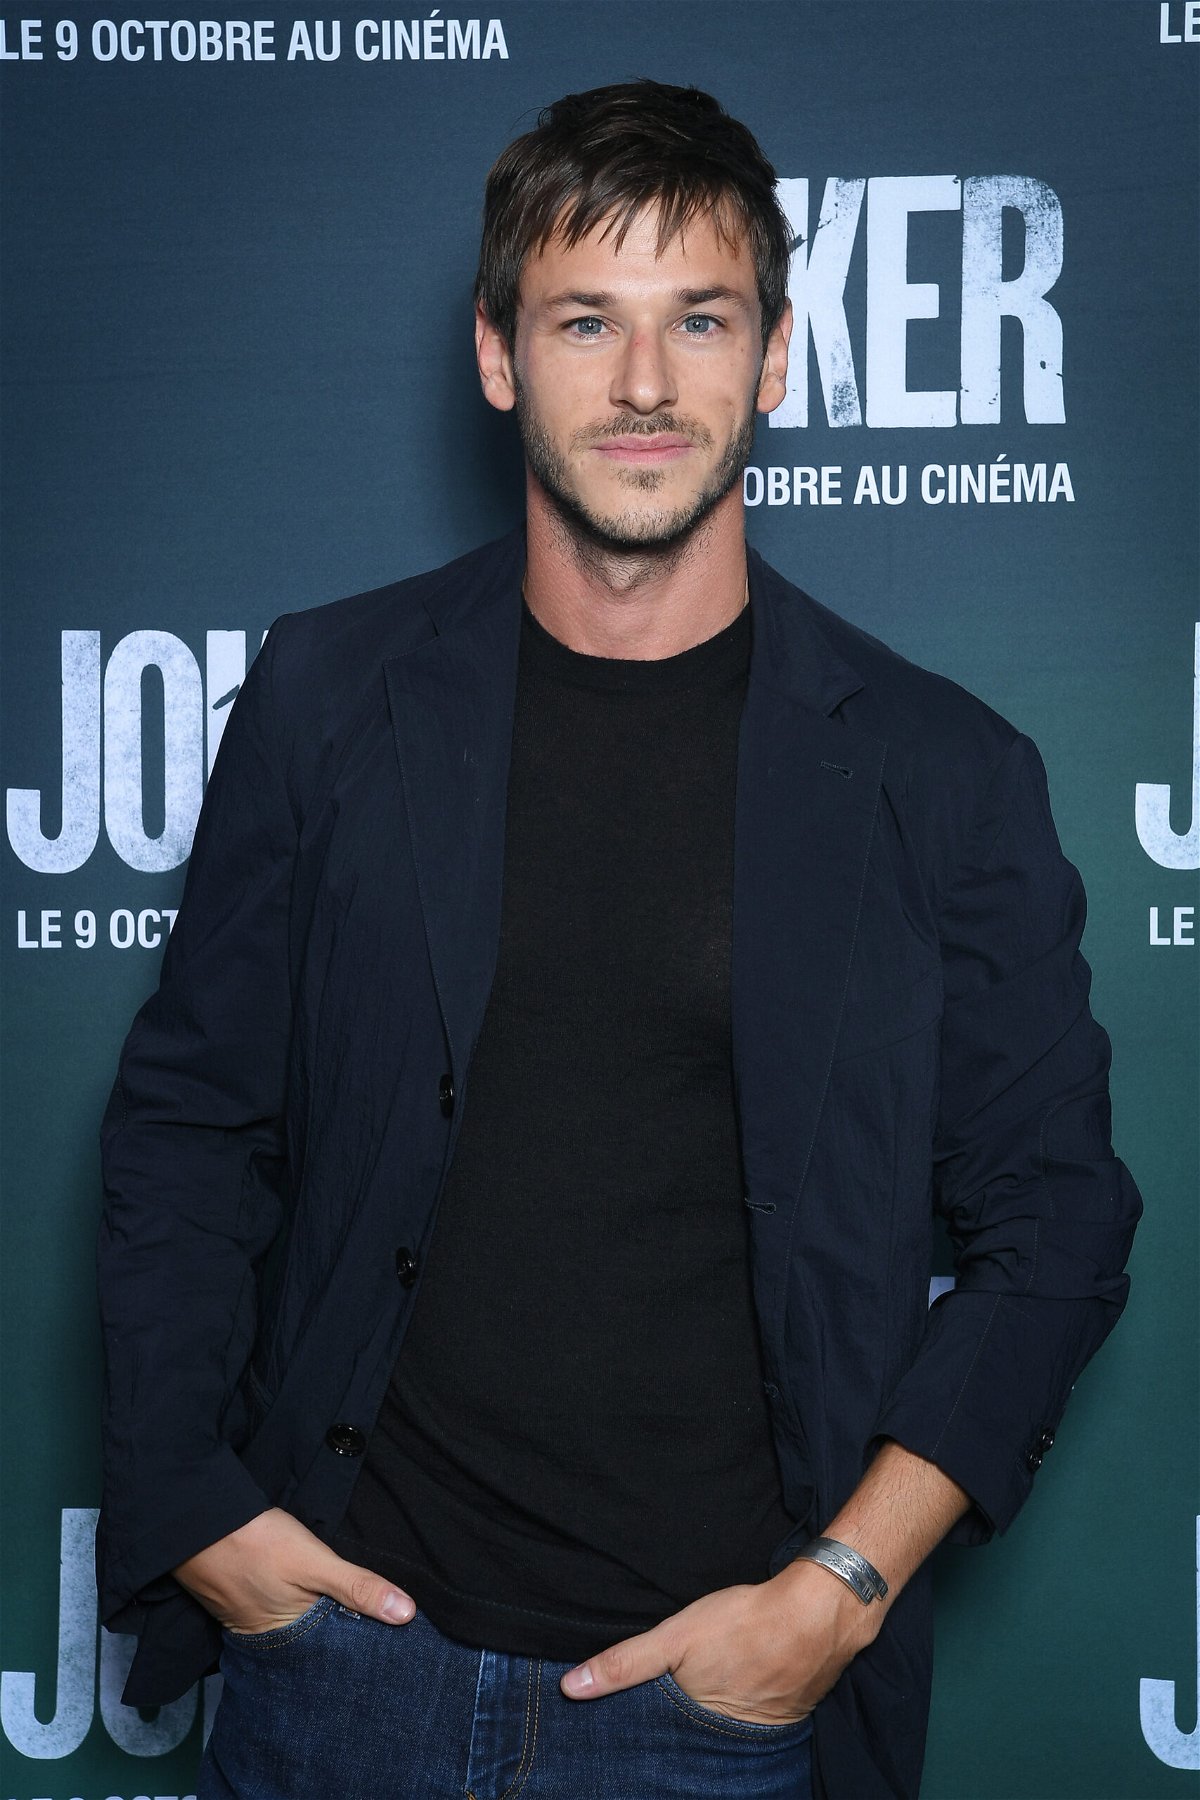 <i>Stephane Cardinale/Corbis/Getty Images</i><br/>French actor Gaspard Ulliel